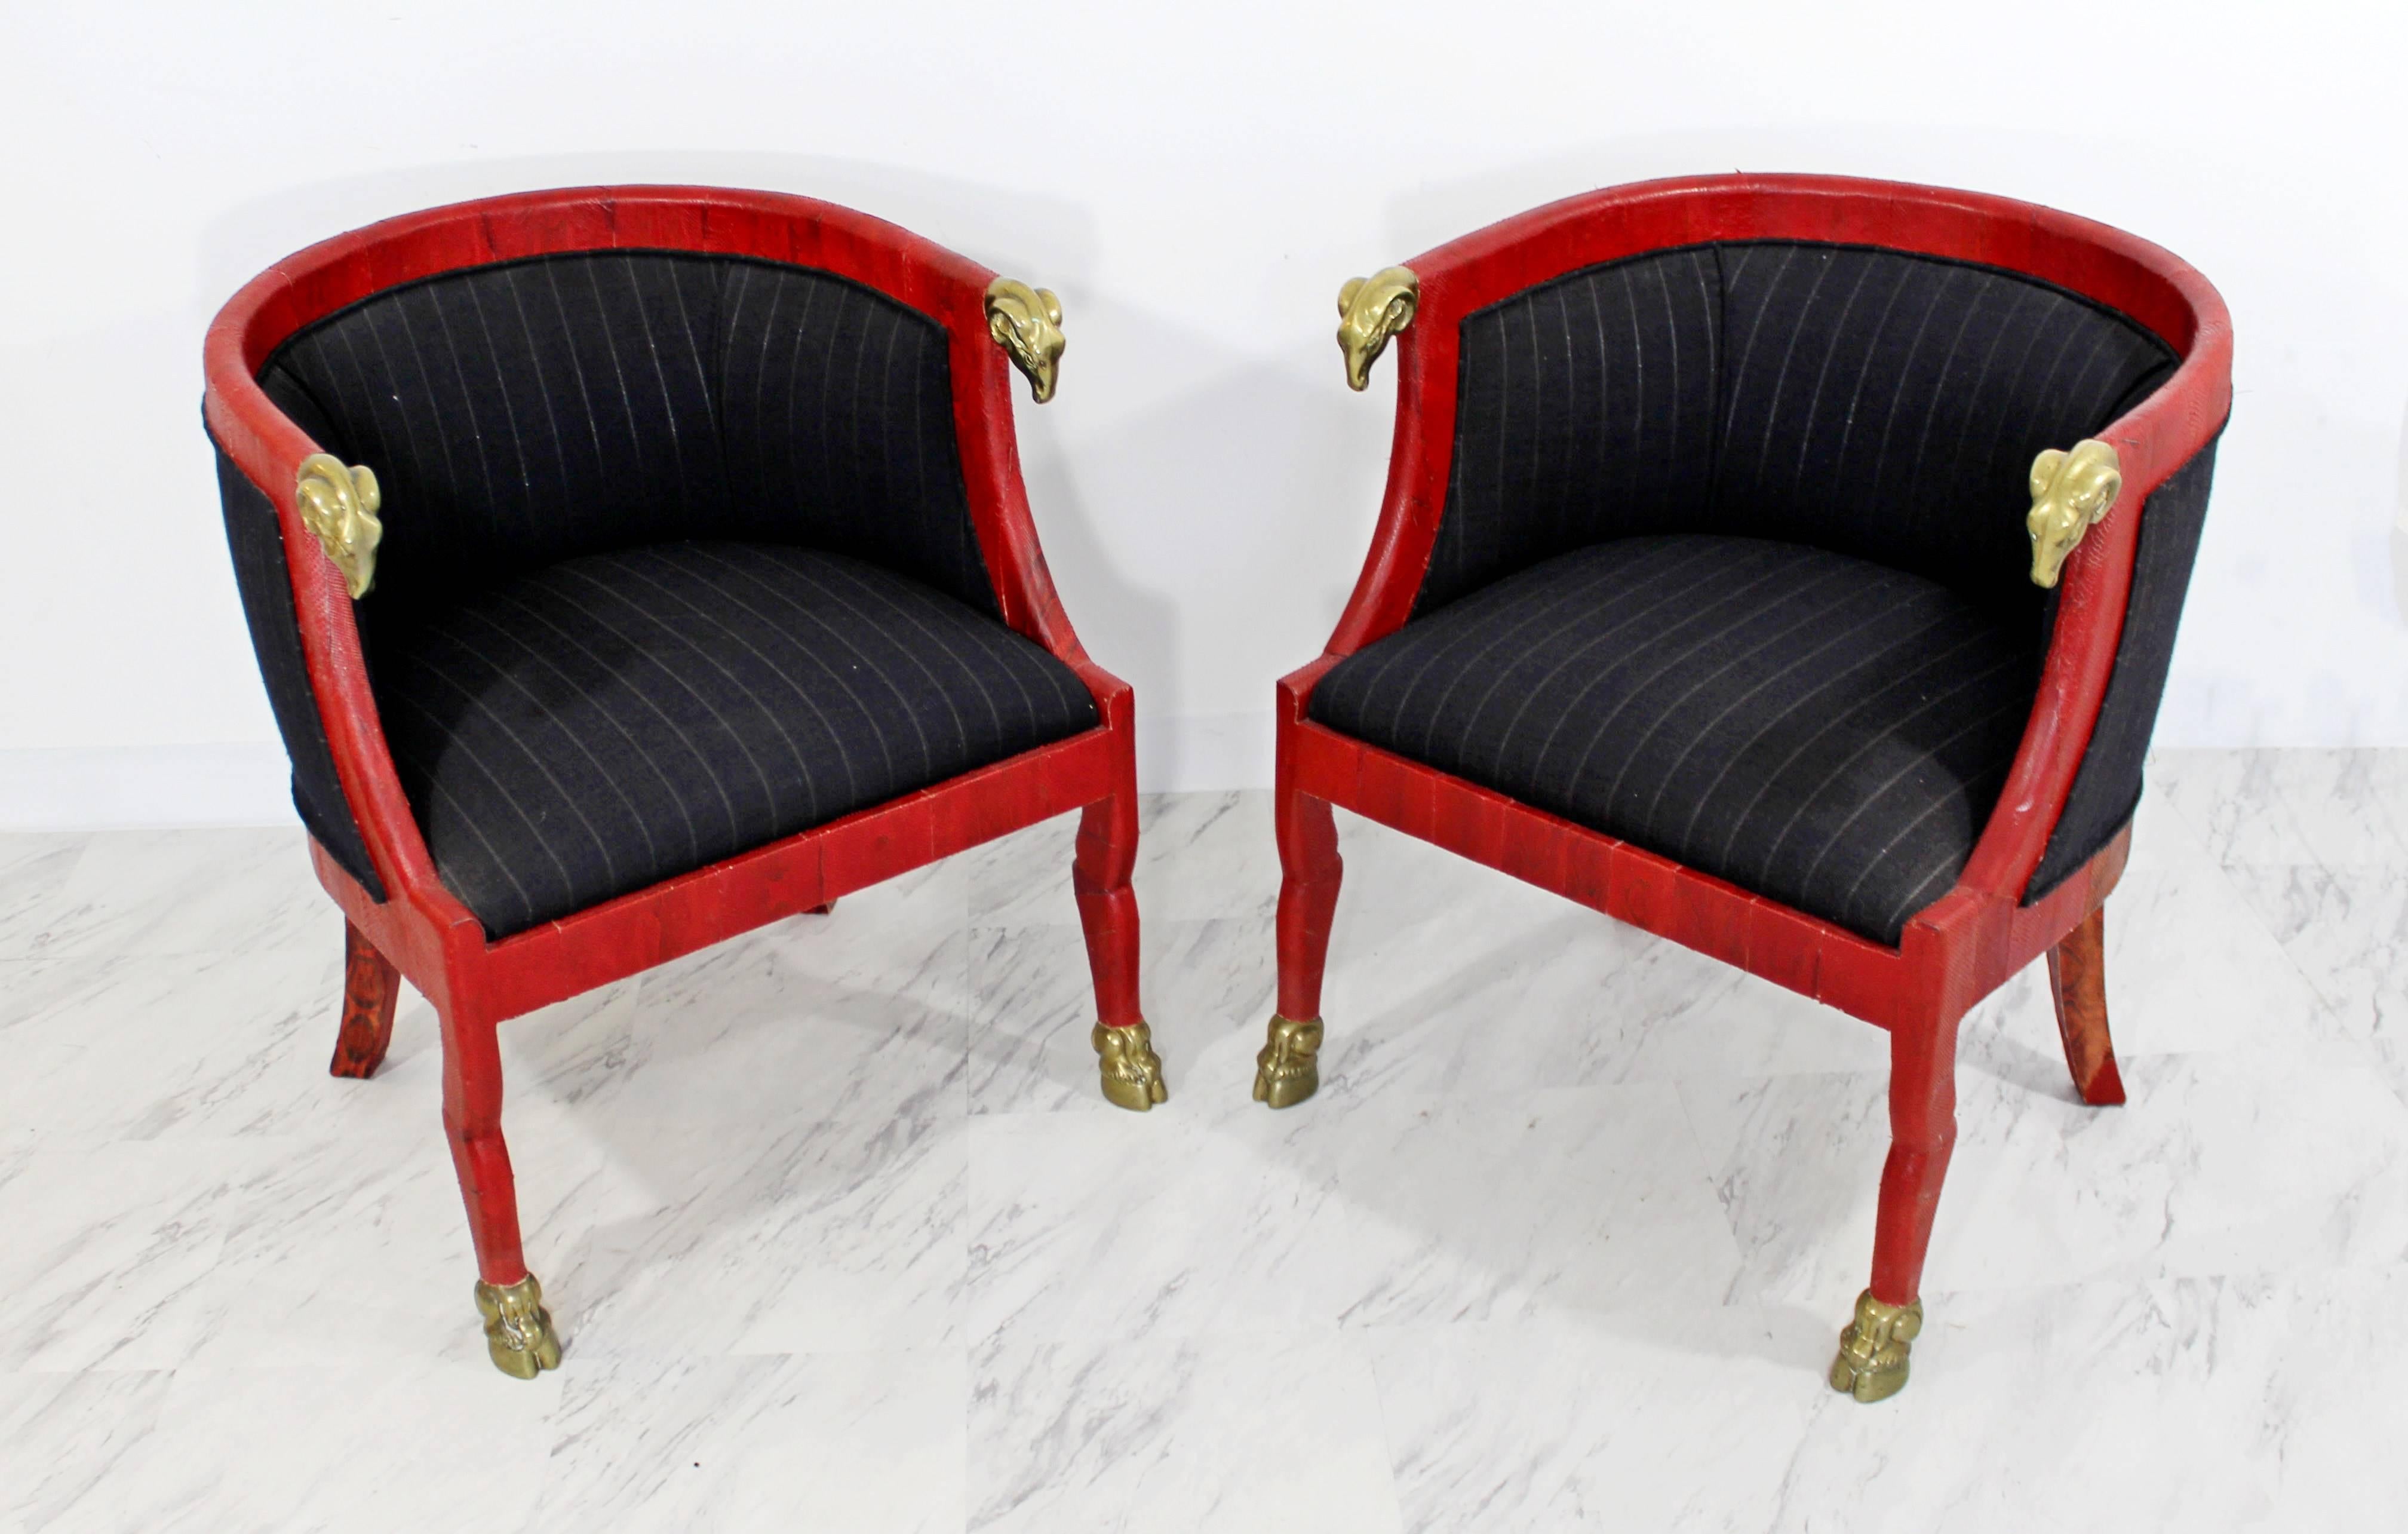 For your consideration is a sculptural pair of Hollywood Regency Barrel, club chairs, handmade in Columbia, with red goatskin and bronze rams heads and feet In excellent condition. Tag reads Pordominsky decorating. The dimensions are 24